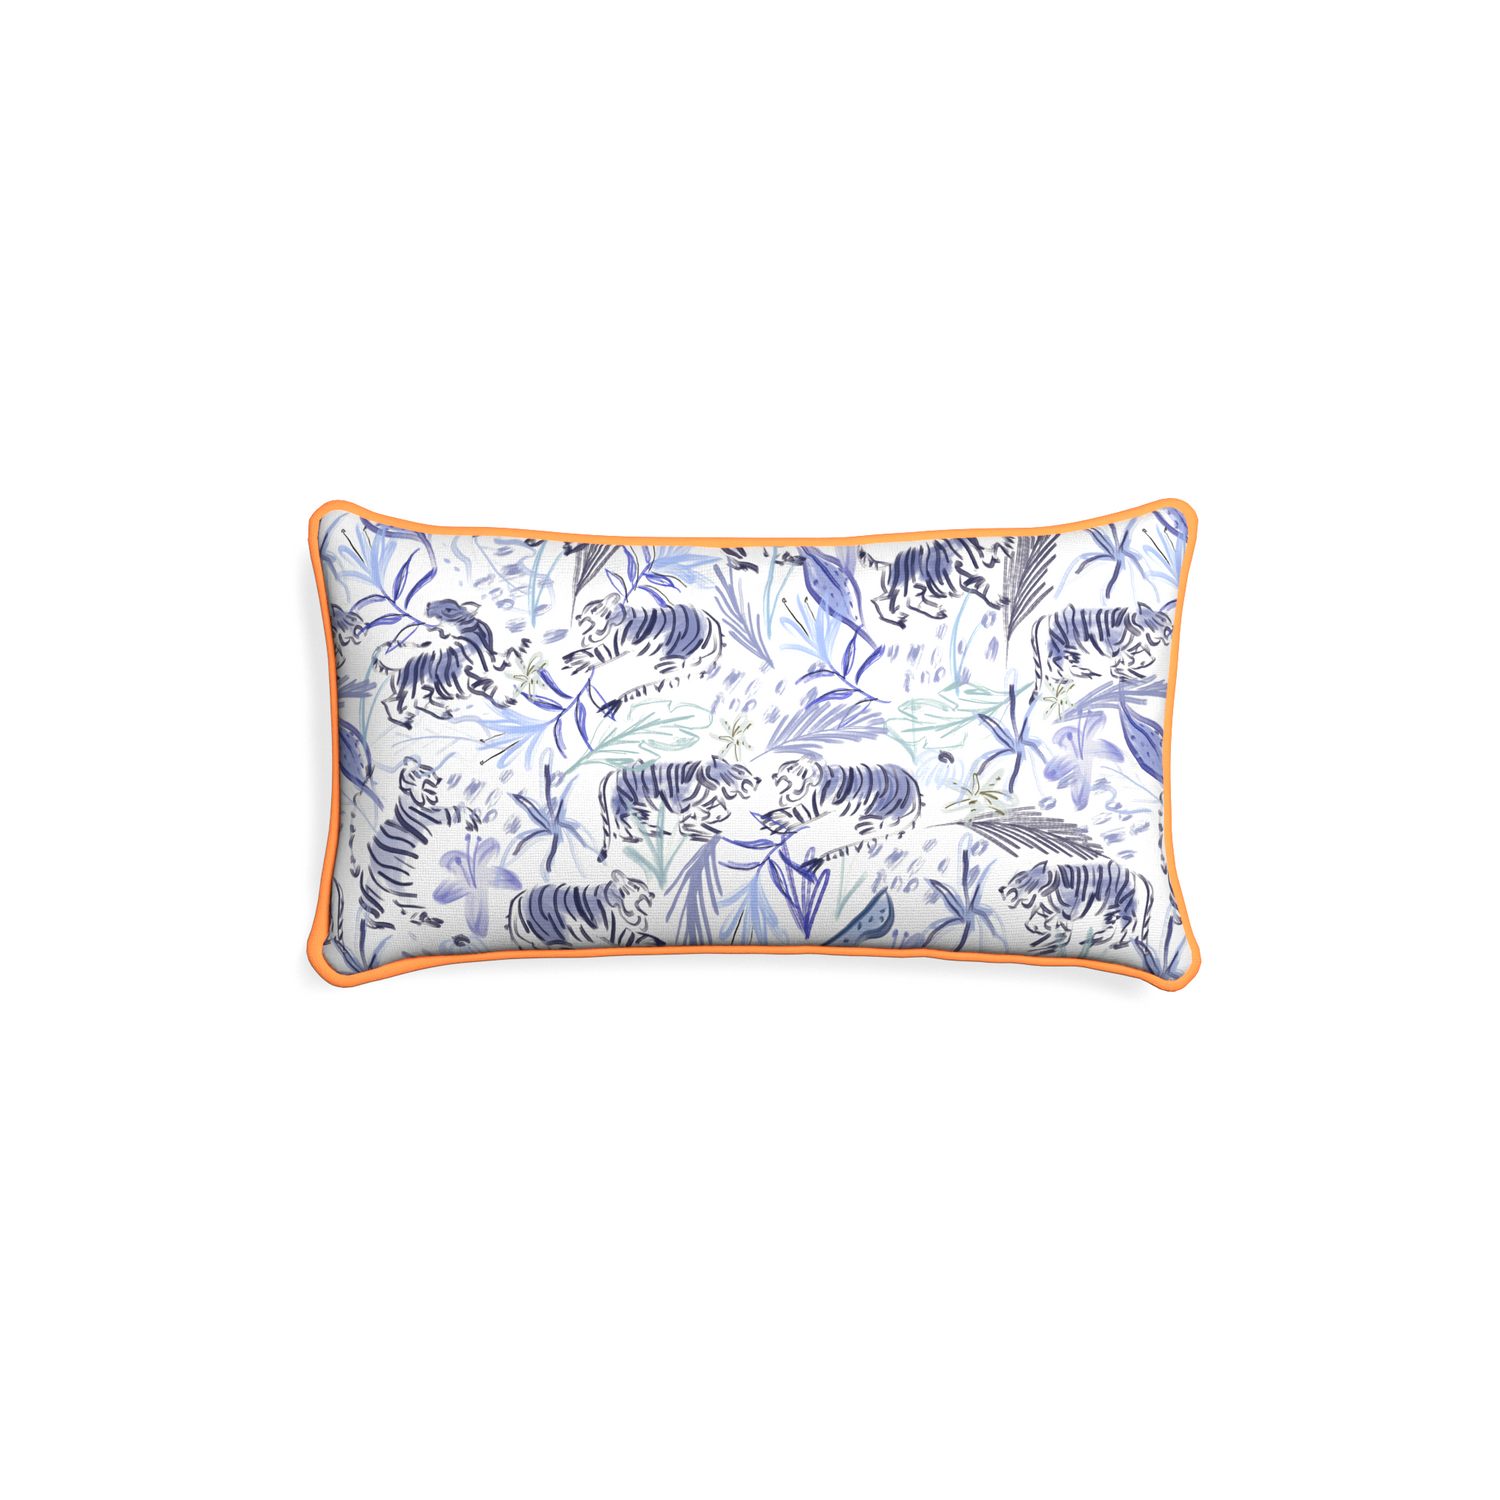 Petite-lumbar frida blue custom blue with intricate tiger designpillow with clementine piping on white background